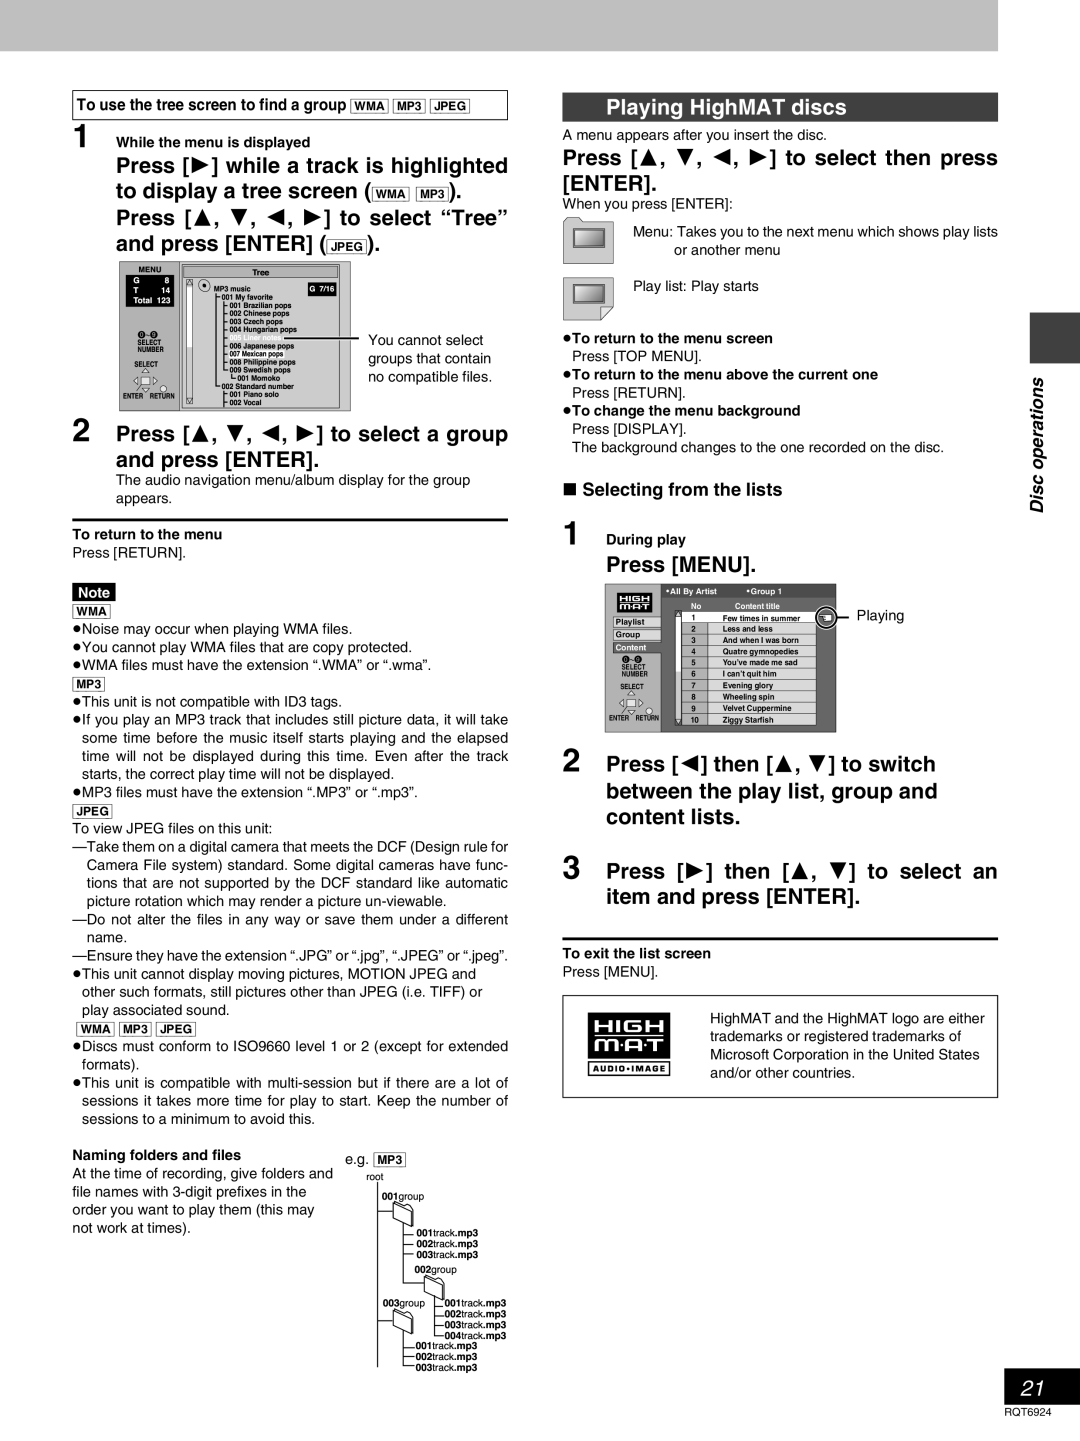 Panasonic SC-DT310 e.g.rootMP3001001group00221track.mp3, to display a tree screen WMA MP3, and press ENTER JPEG, Disc 